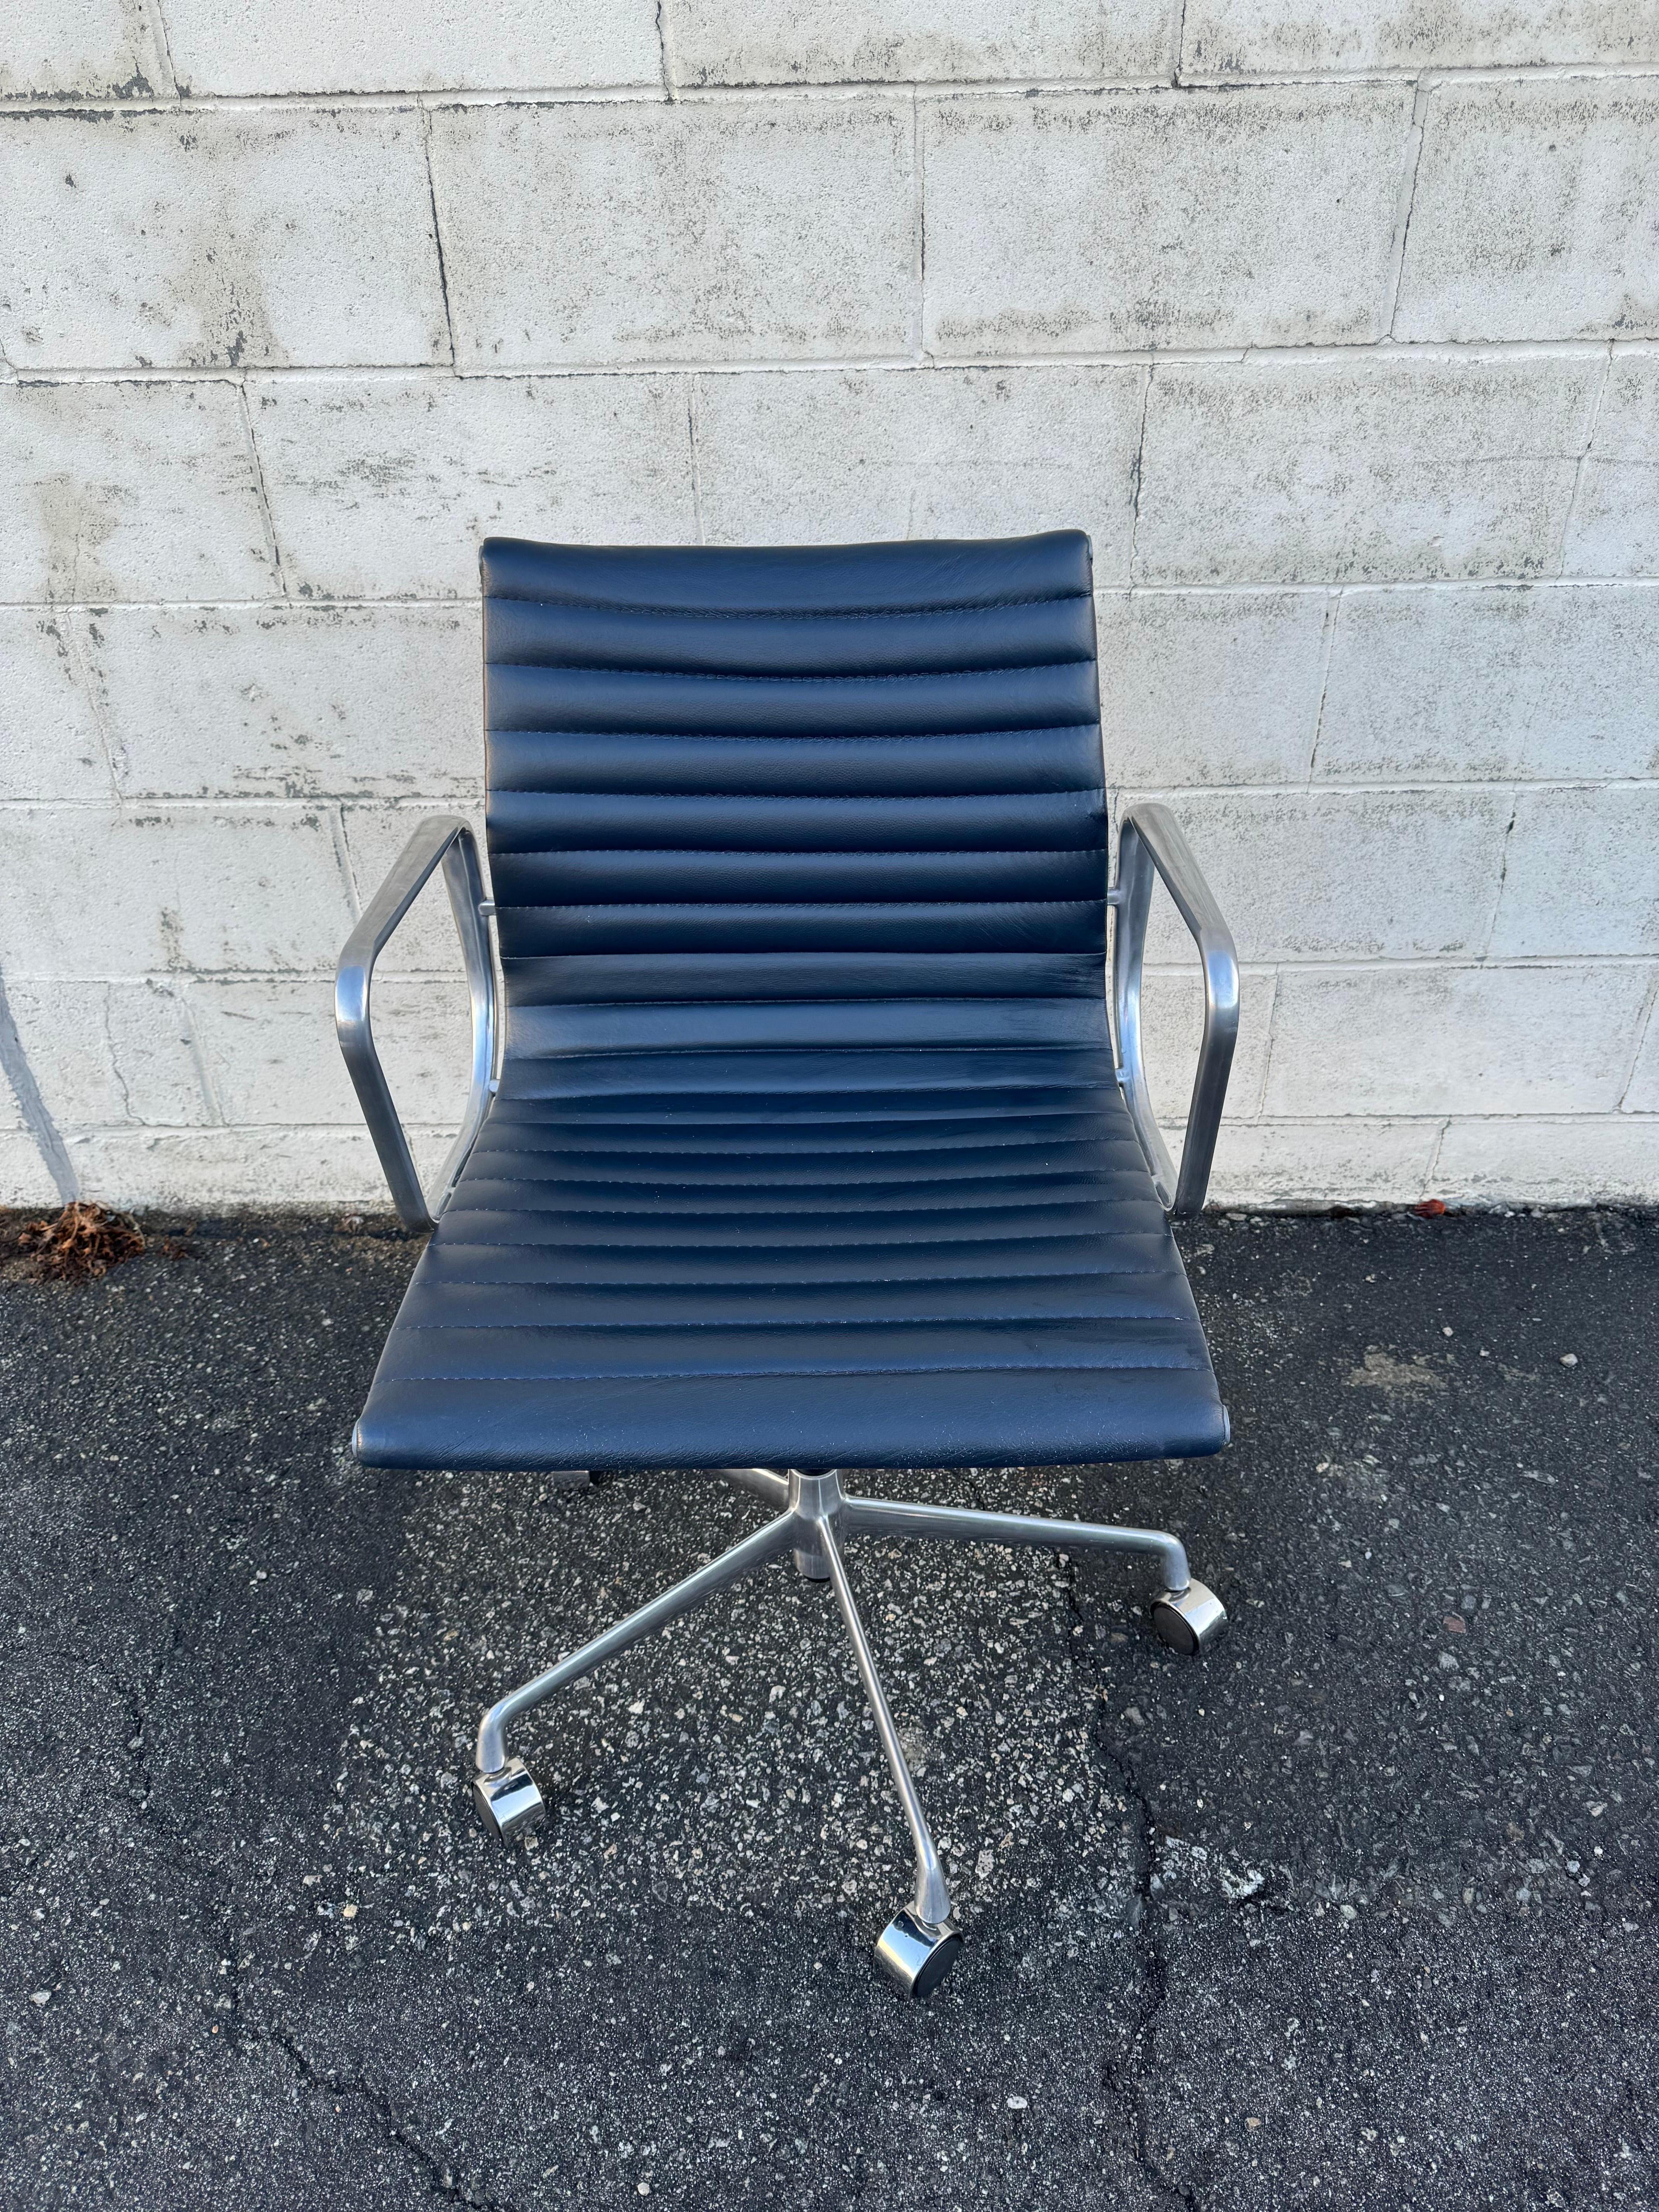 Cool and iconic chair designed in the style of Ray and Charles Eames and produced in the style of Herman Miller. Although we have no tags linking the famed Eames designers and Herman Miller maker to this chair we were promised by the original owners